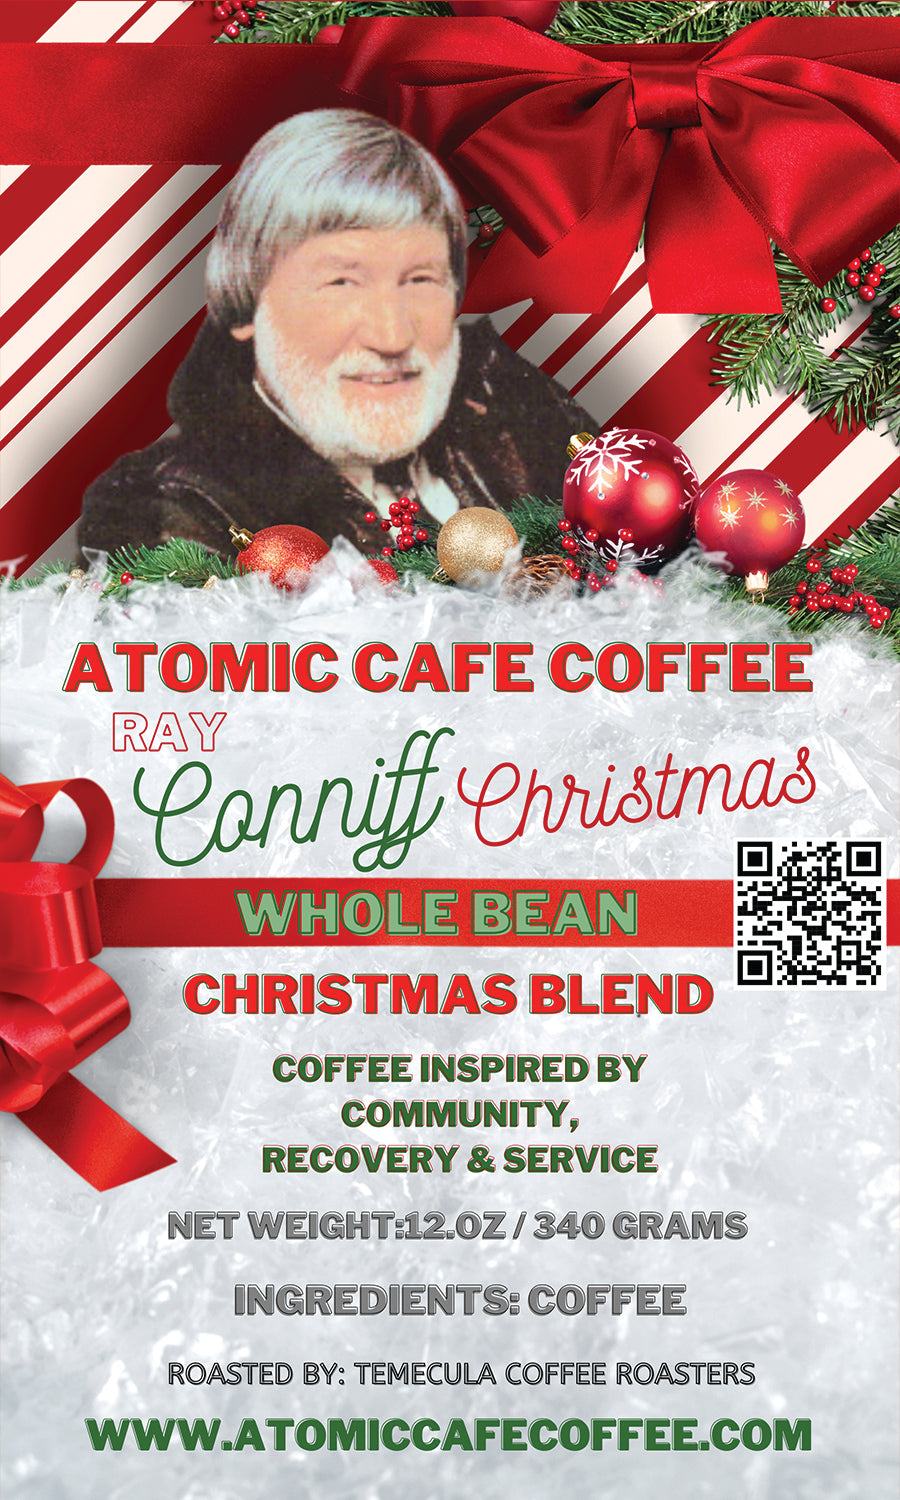 Conniff Christmas Blend (read more)